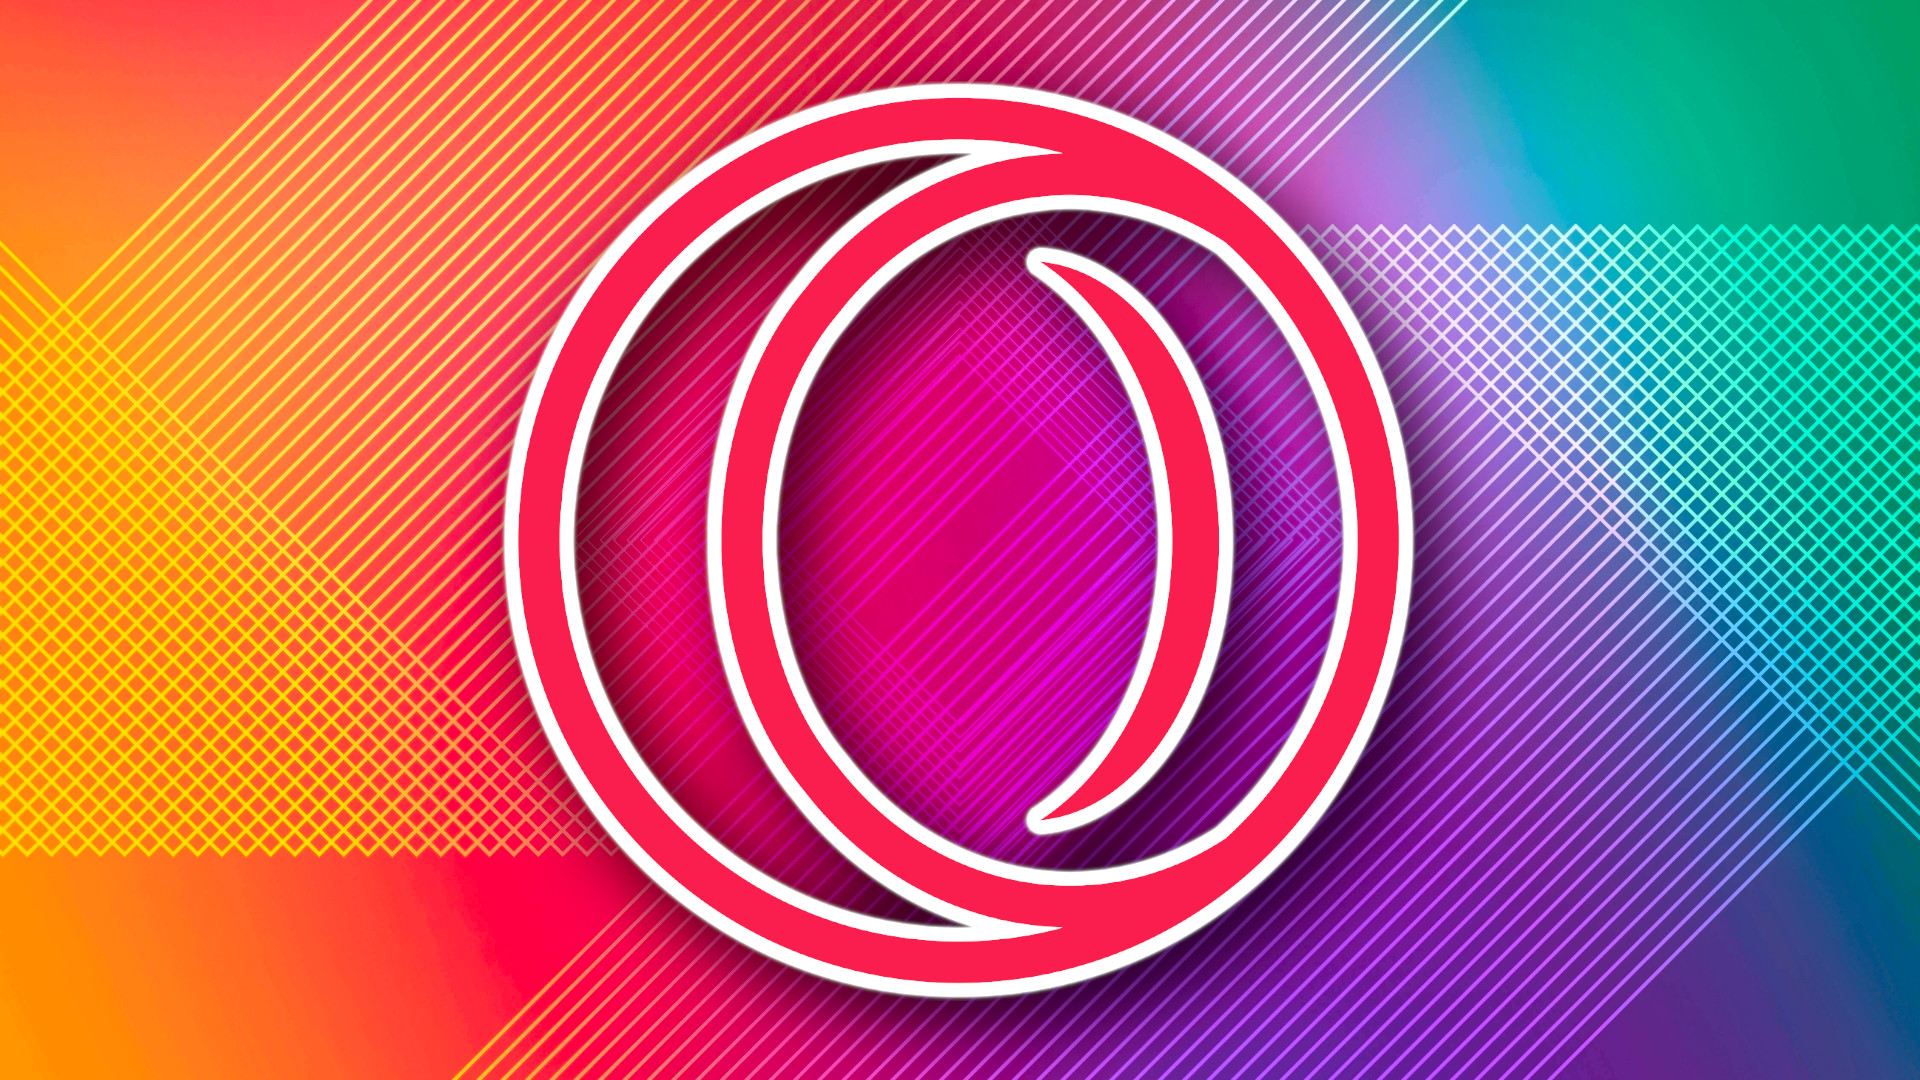 Opera browser logo on abstract background